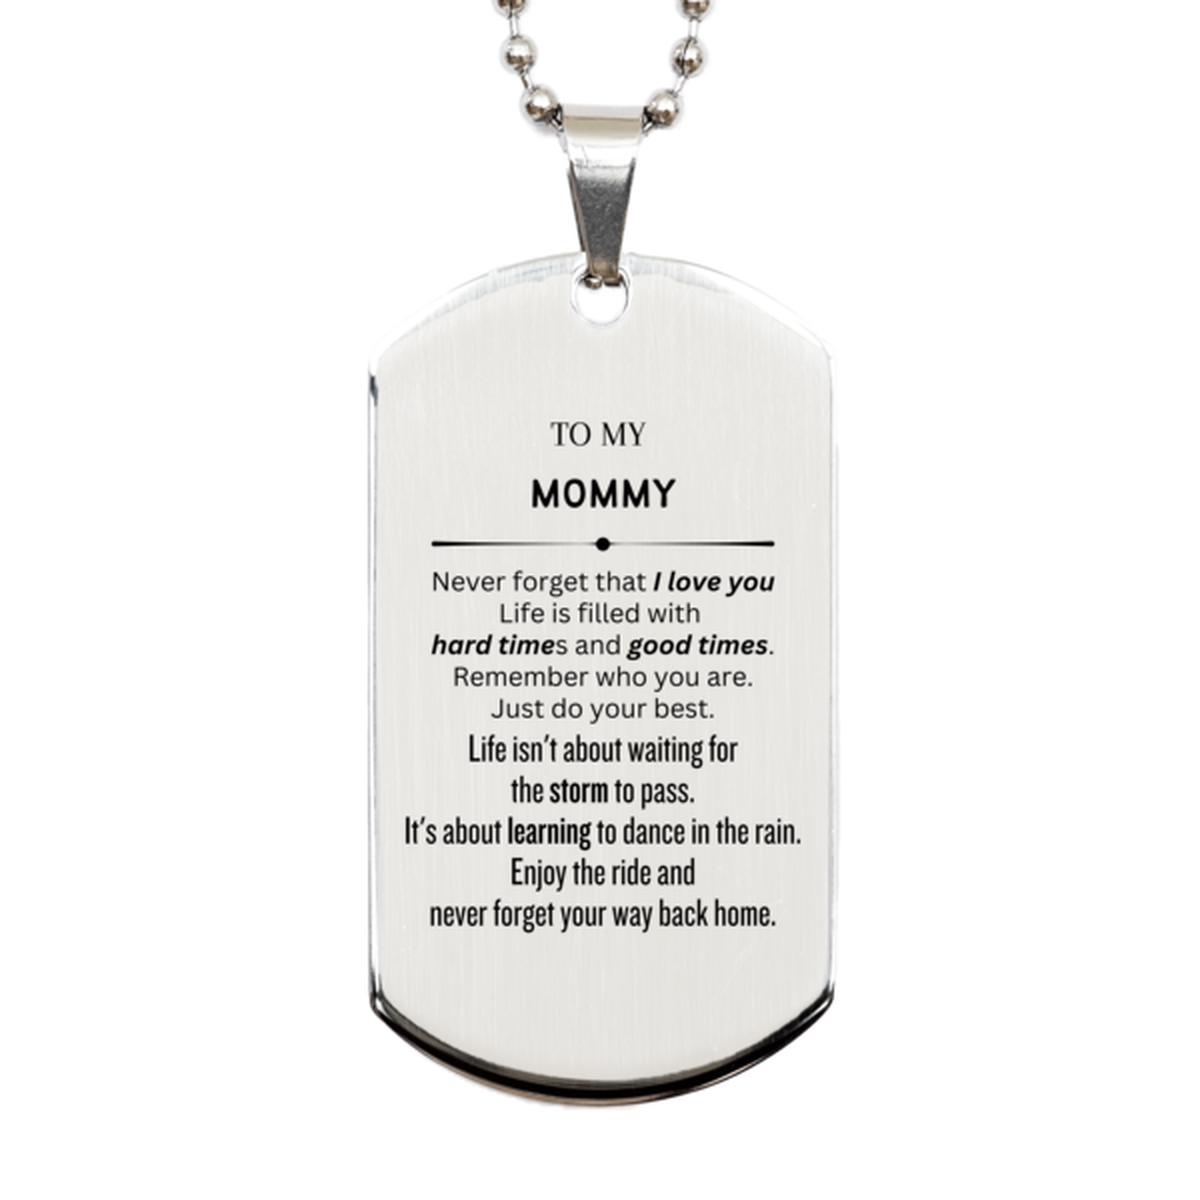 Christmas Mommy Silver Dog Tag Gifts, To My Mommy Birthday Thank You Gifts For Mommy, Graduation Unique Gifts For Mommy To My Mommy Never forget that I love you life is filled with hard times and good times. Remember who you are. Just do your best